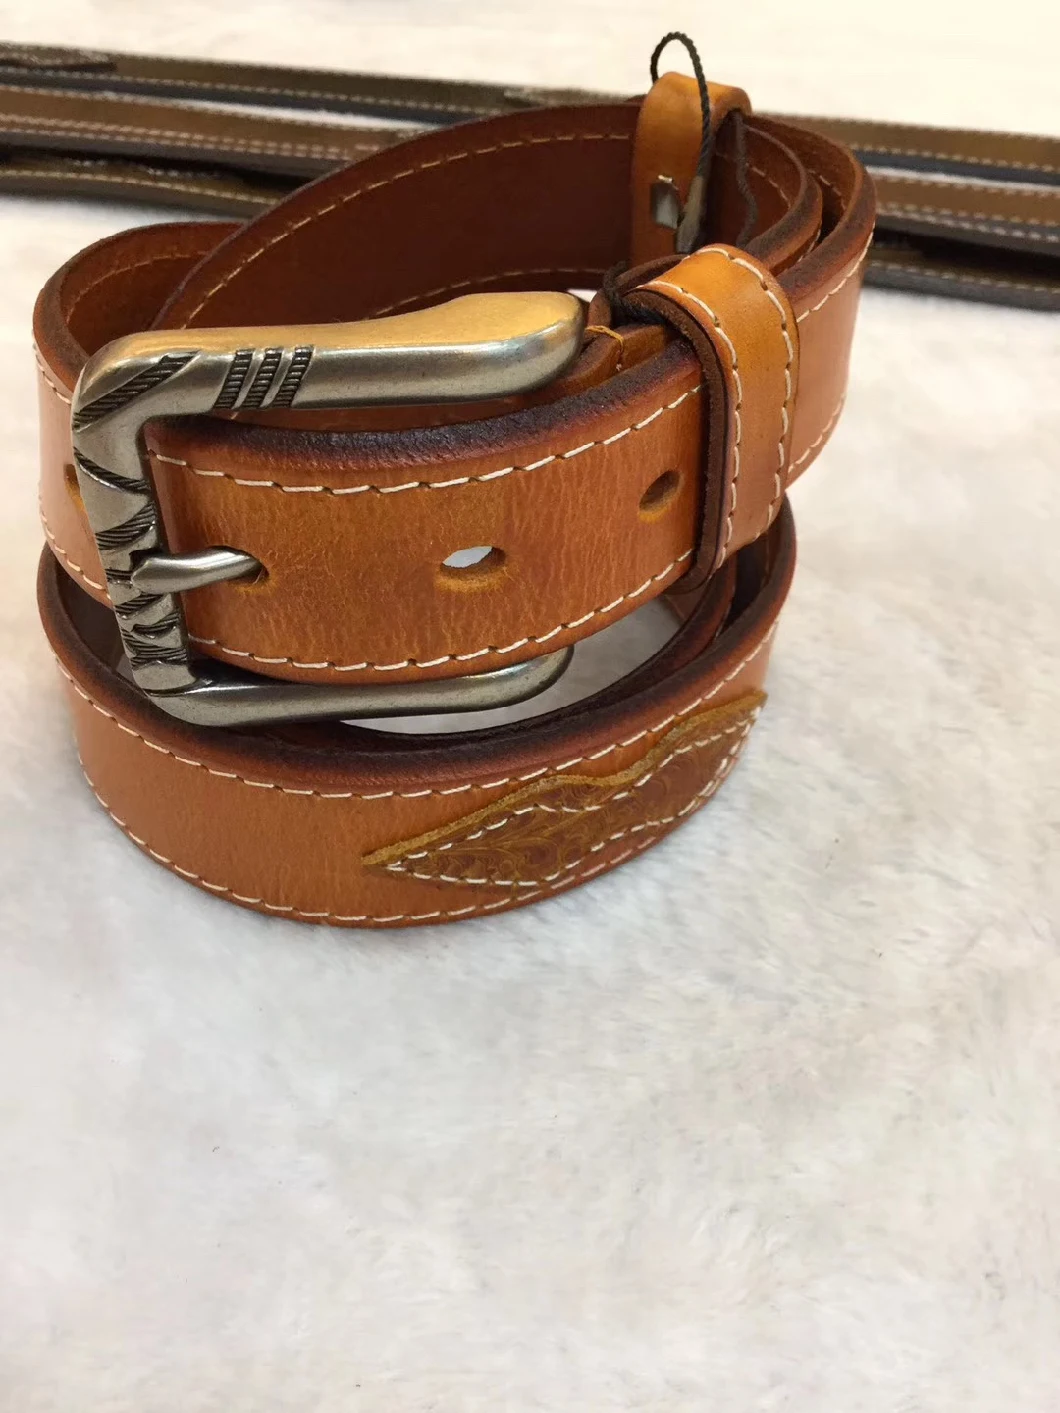 New Style Leather Bellt with Leather Patch Stitching (E3507)